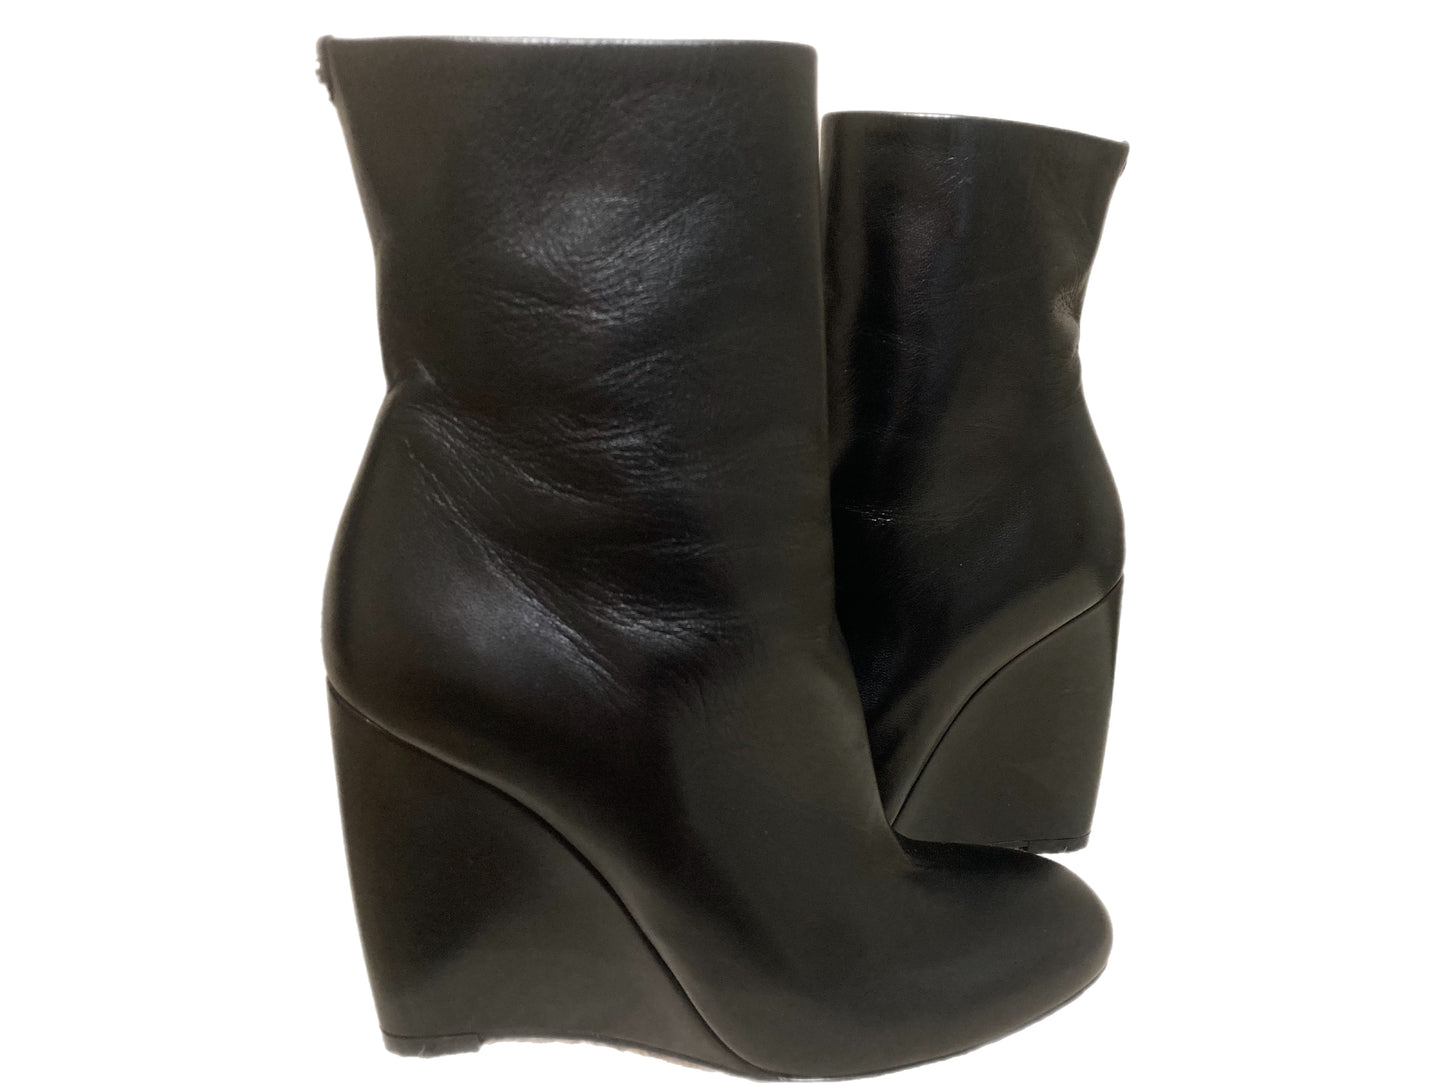 GUCCI Leather Wedge Booties Black Size 36.5